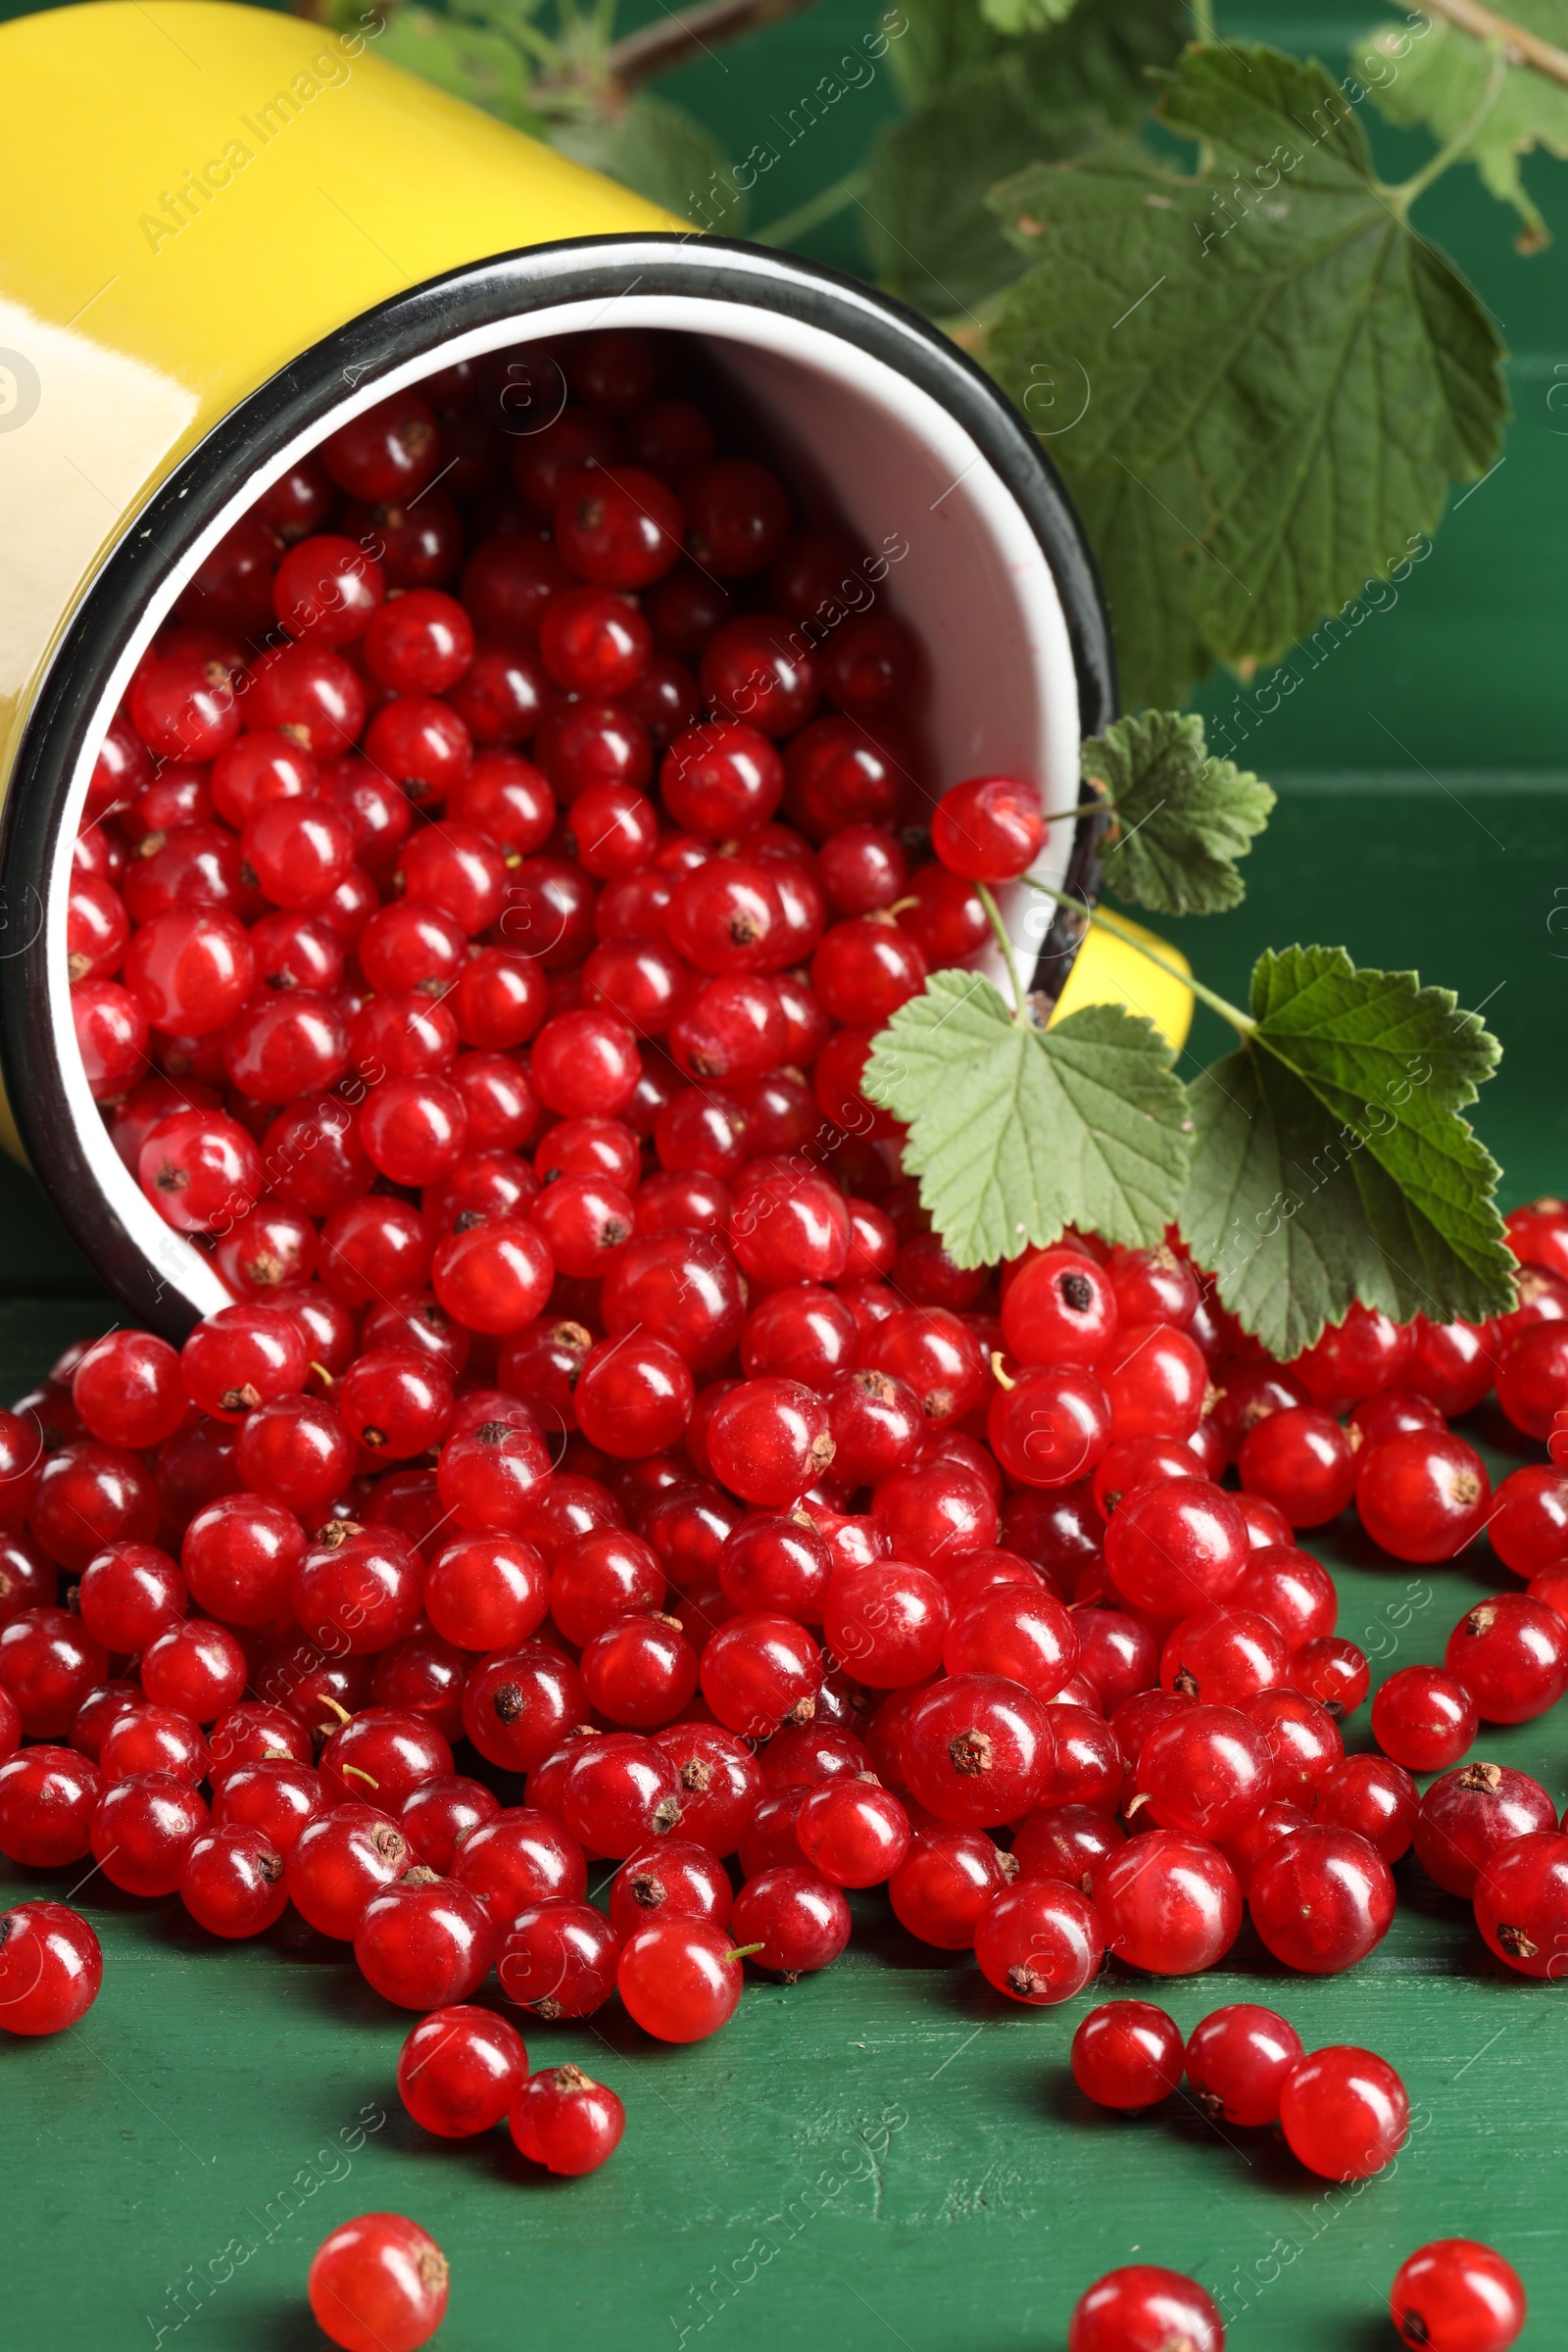 Photo of Many ripe red currants, mug and leaves on green wooden table, closeup